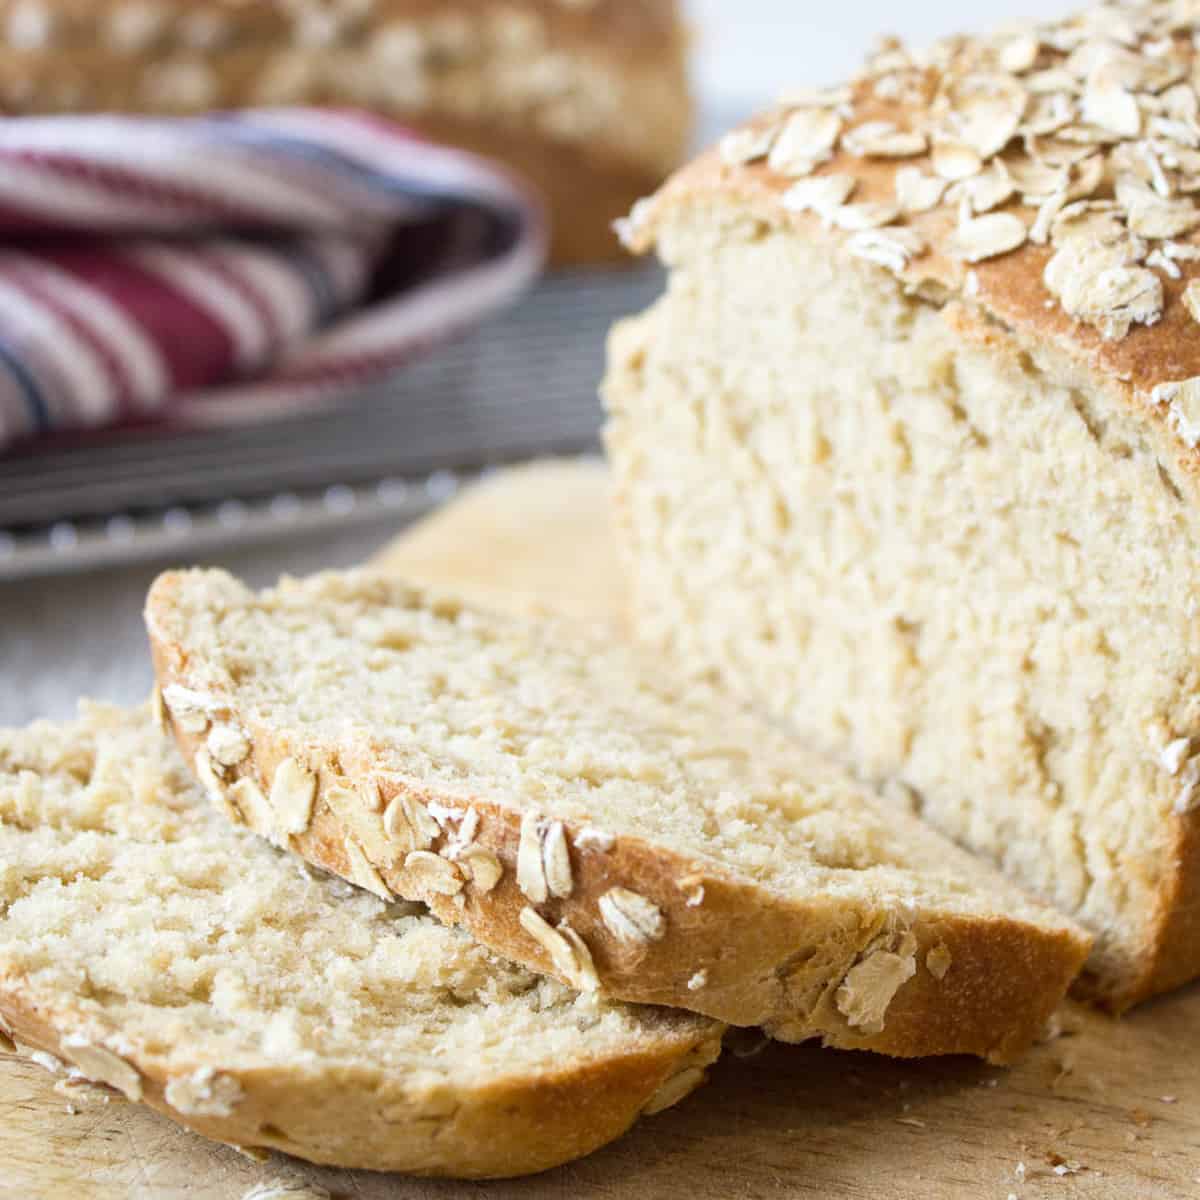 A loaf of wheat bread topped with oats.